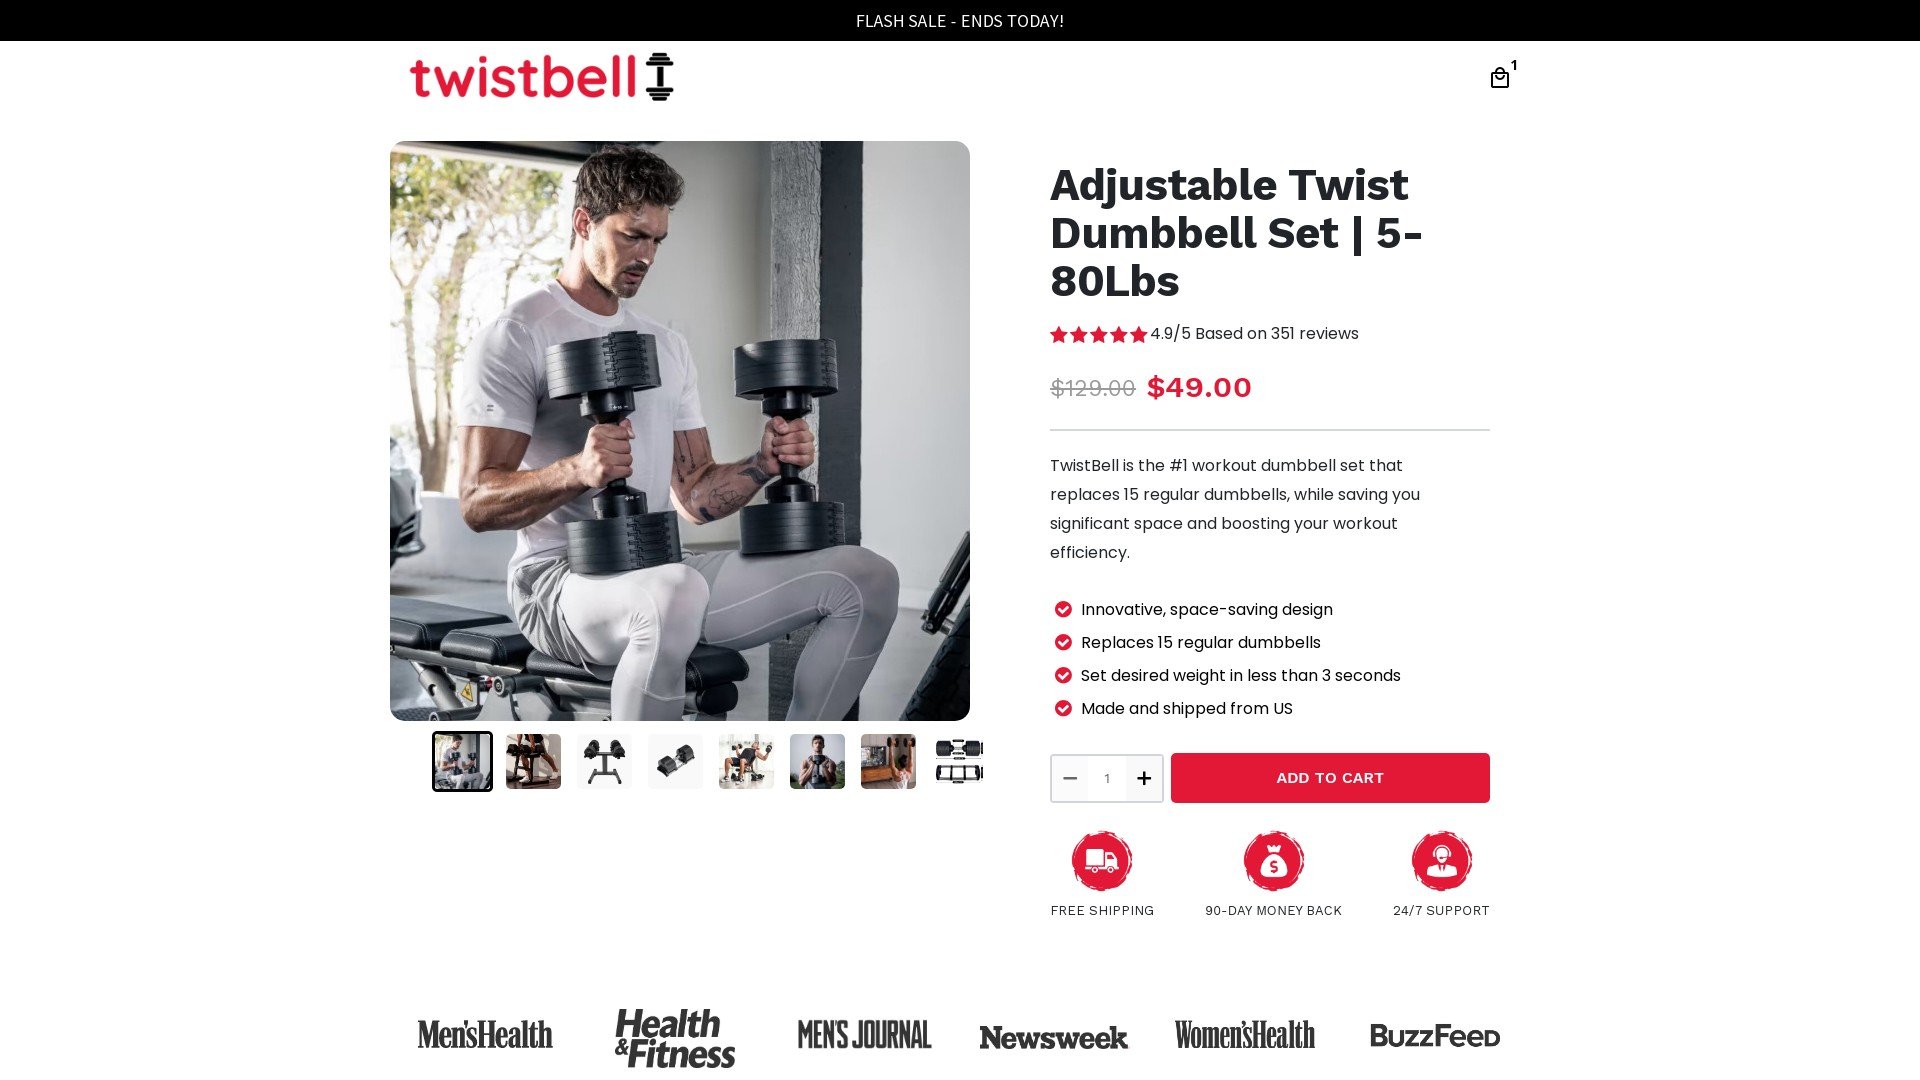 Twistbell at twistbell.com